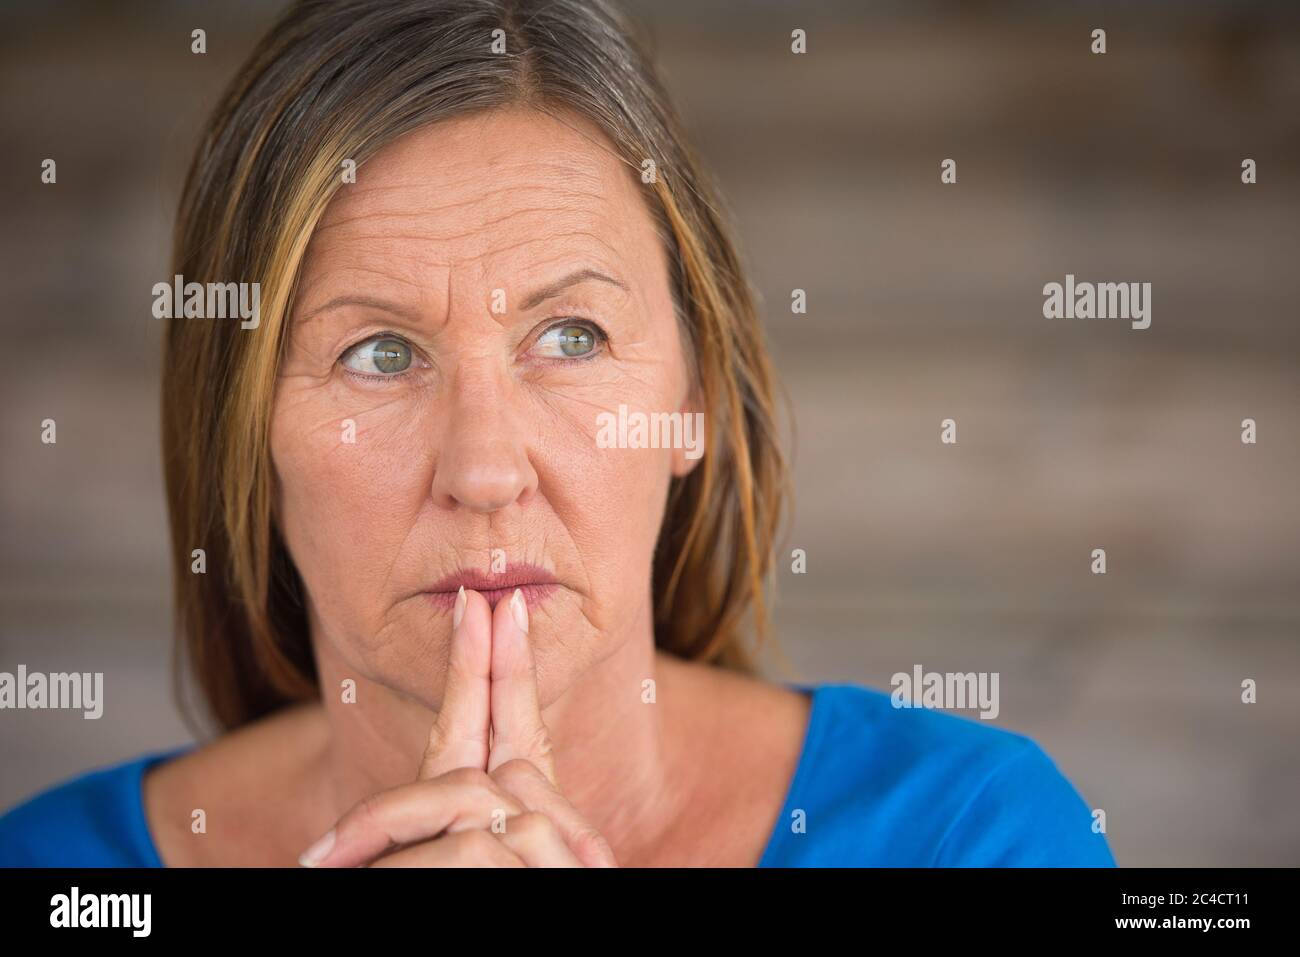 Portrtait attractive religious mature woman praying with folded hands, thoughtful, hopeful, meditating, blurred background, copy space. Stock Photo